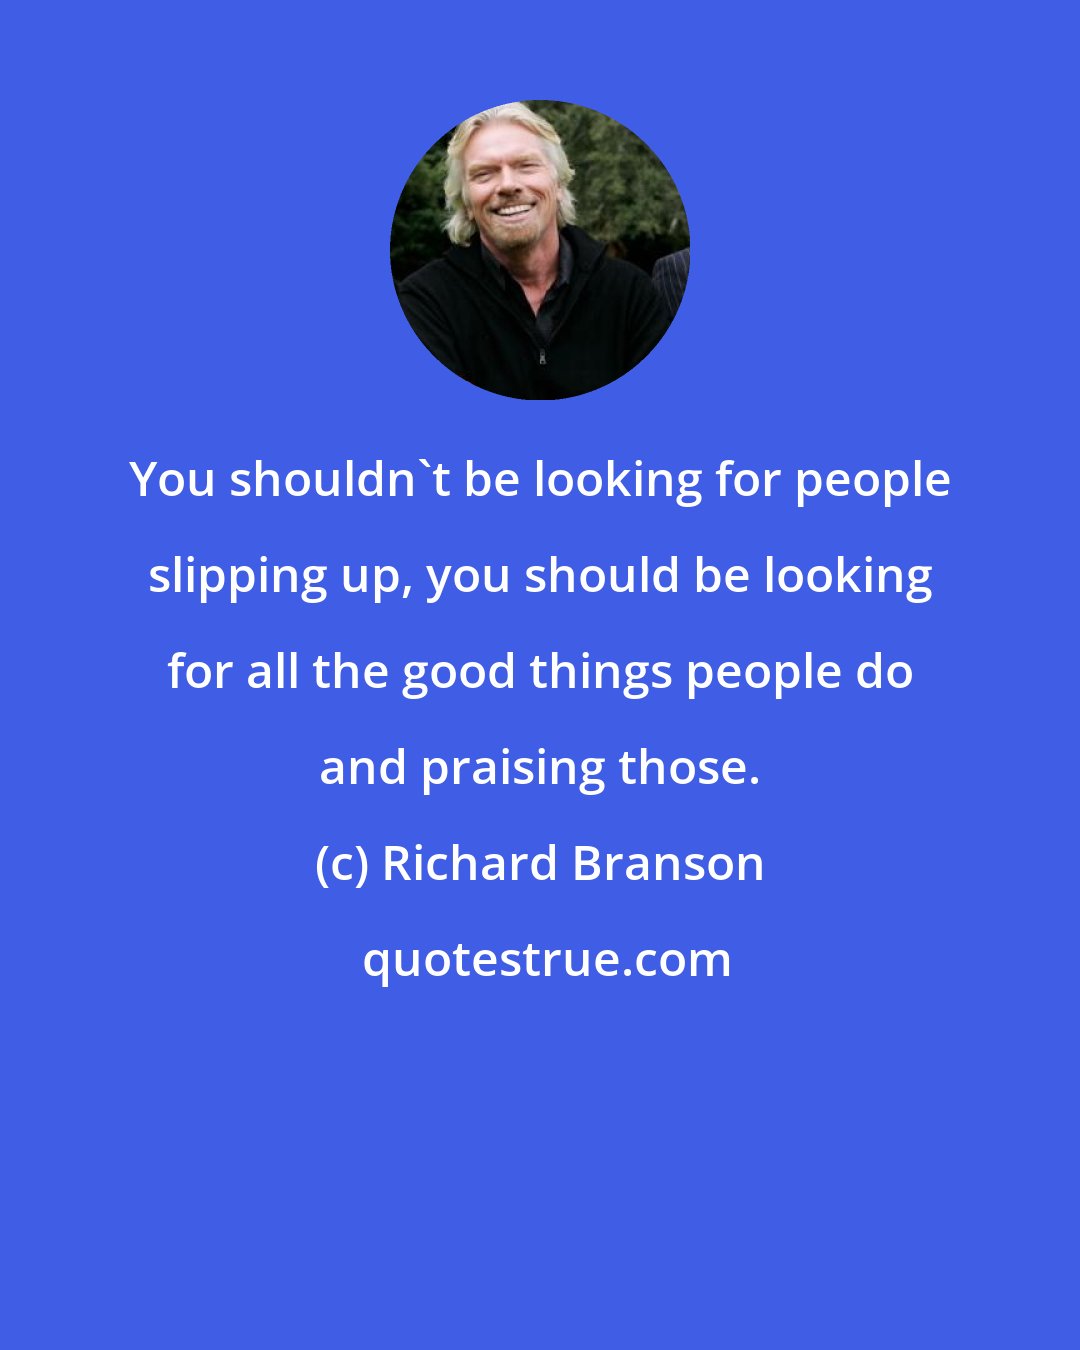 Richard Branson: You shouldn't be looking for people slipping up, you should be looking for all the good things people do and praising those.